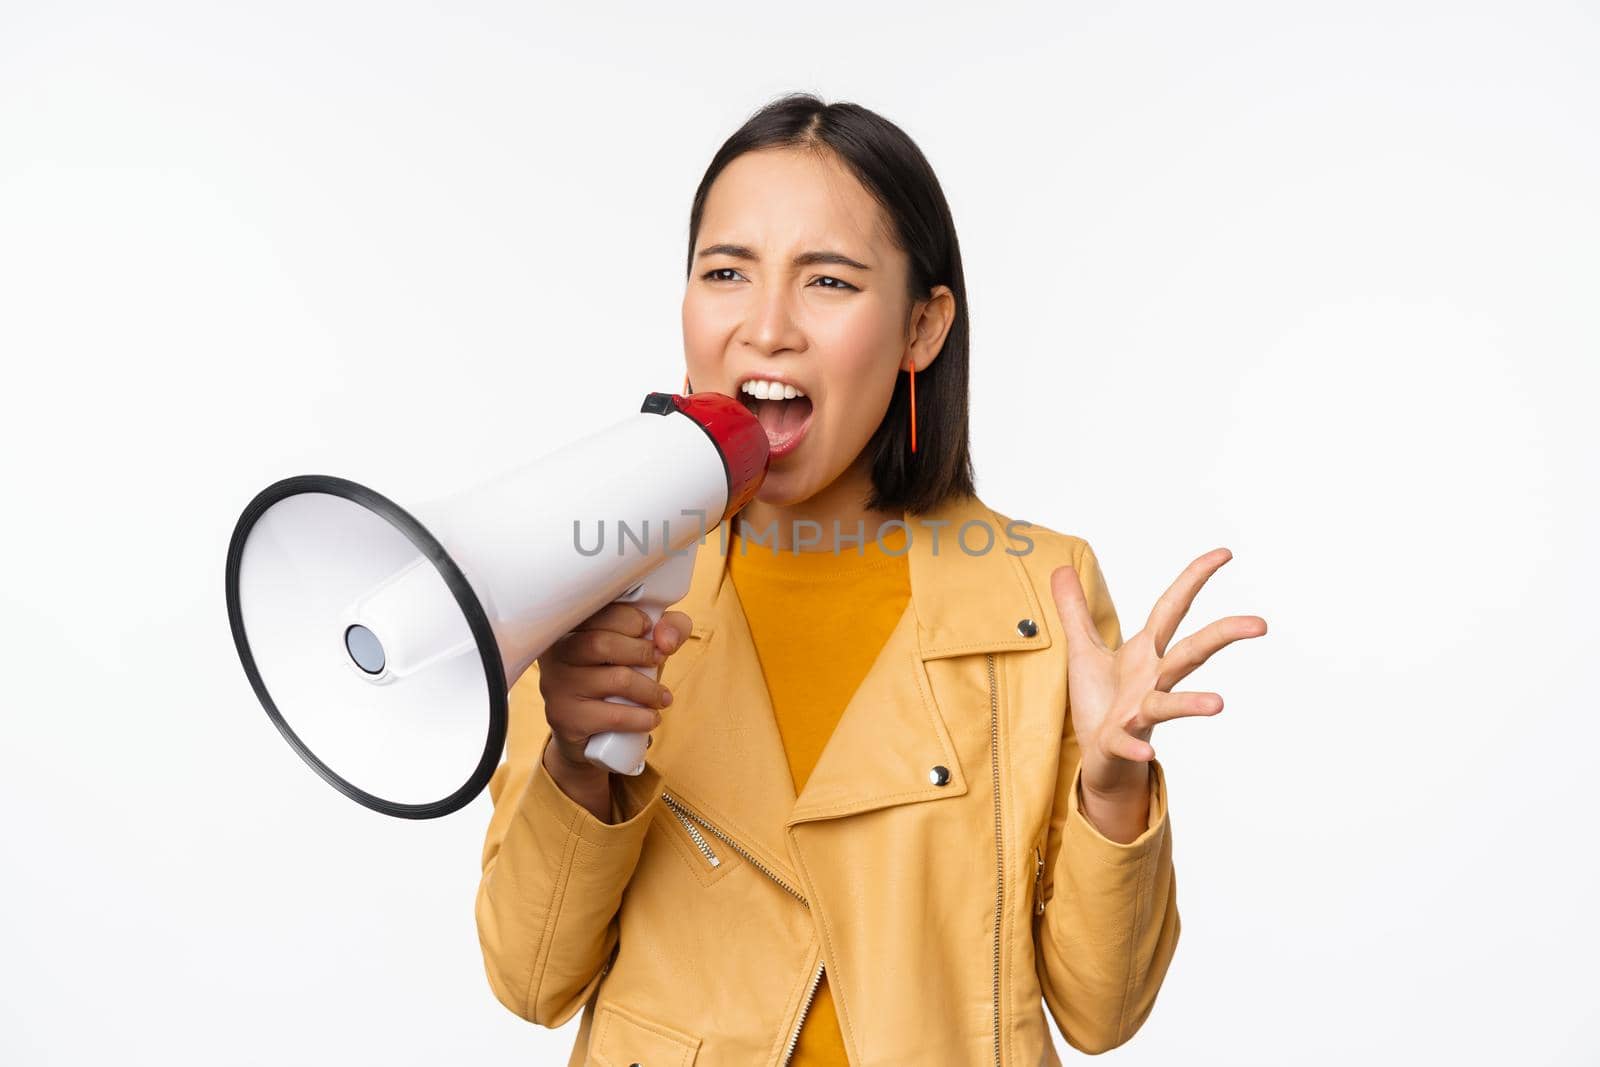 Portrait of young asian woman protester, screaming in megaphone and protesting, standing confident against white background.